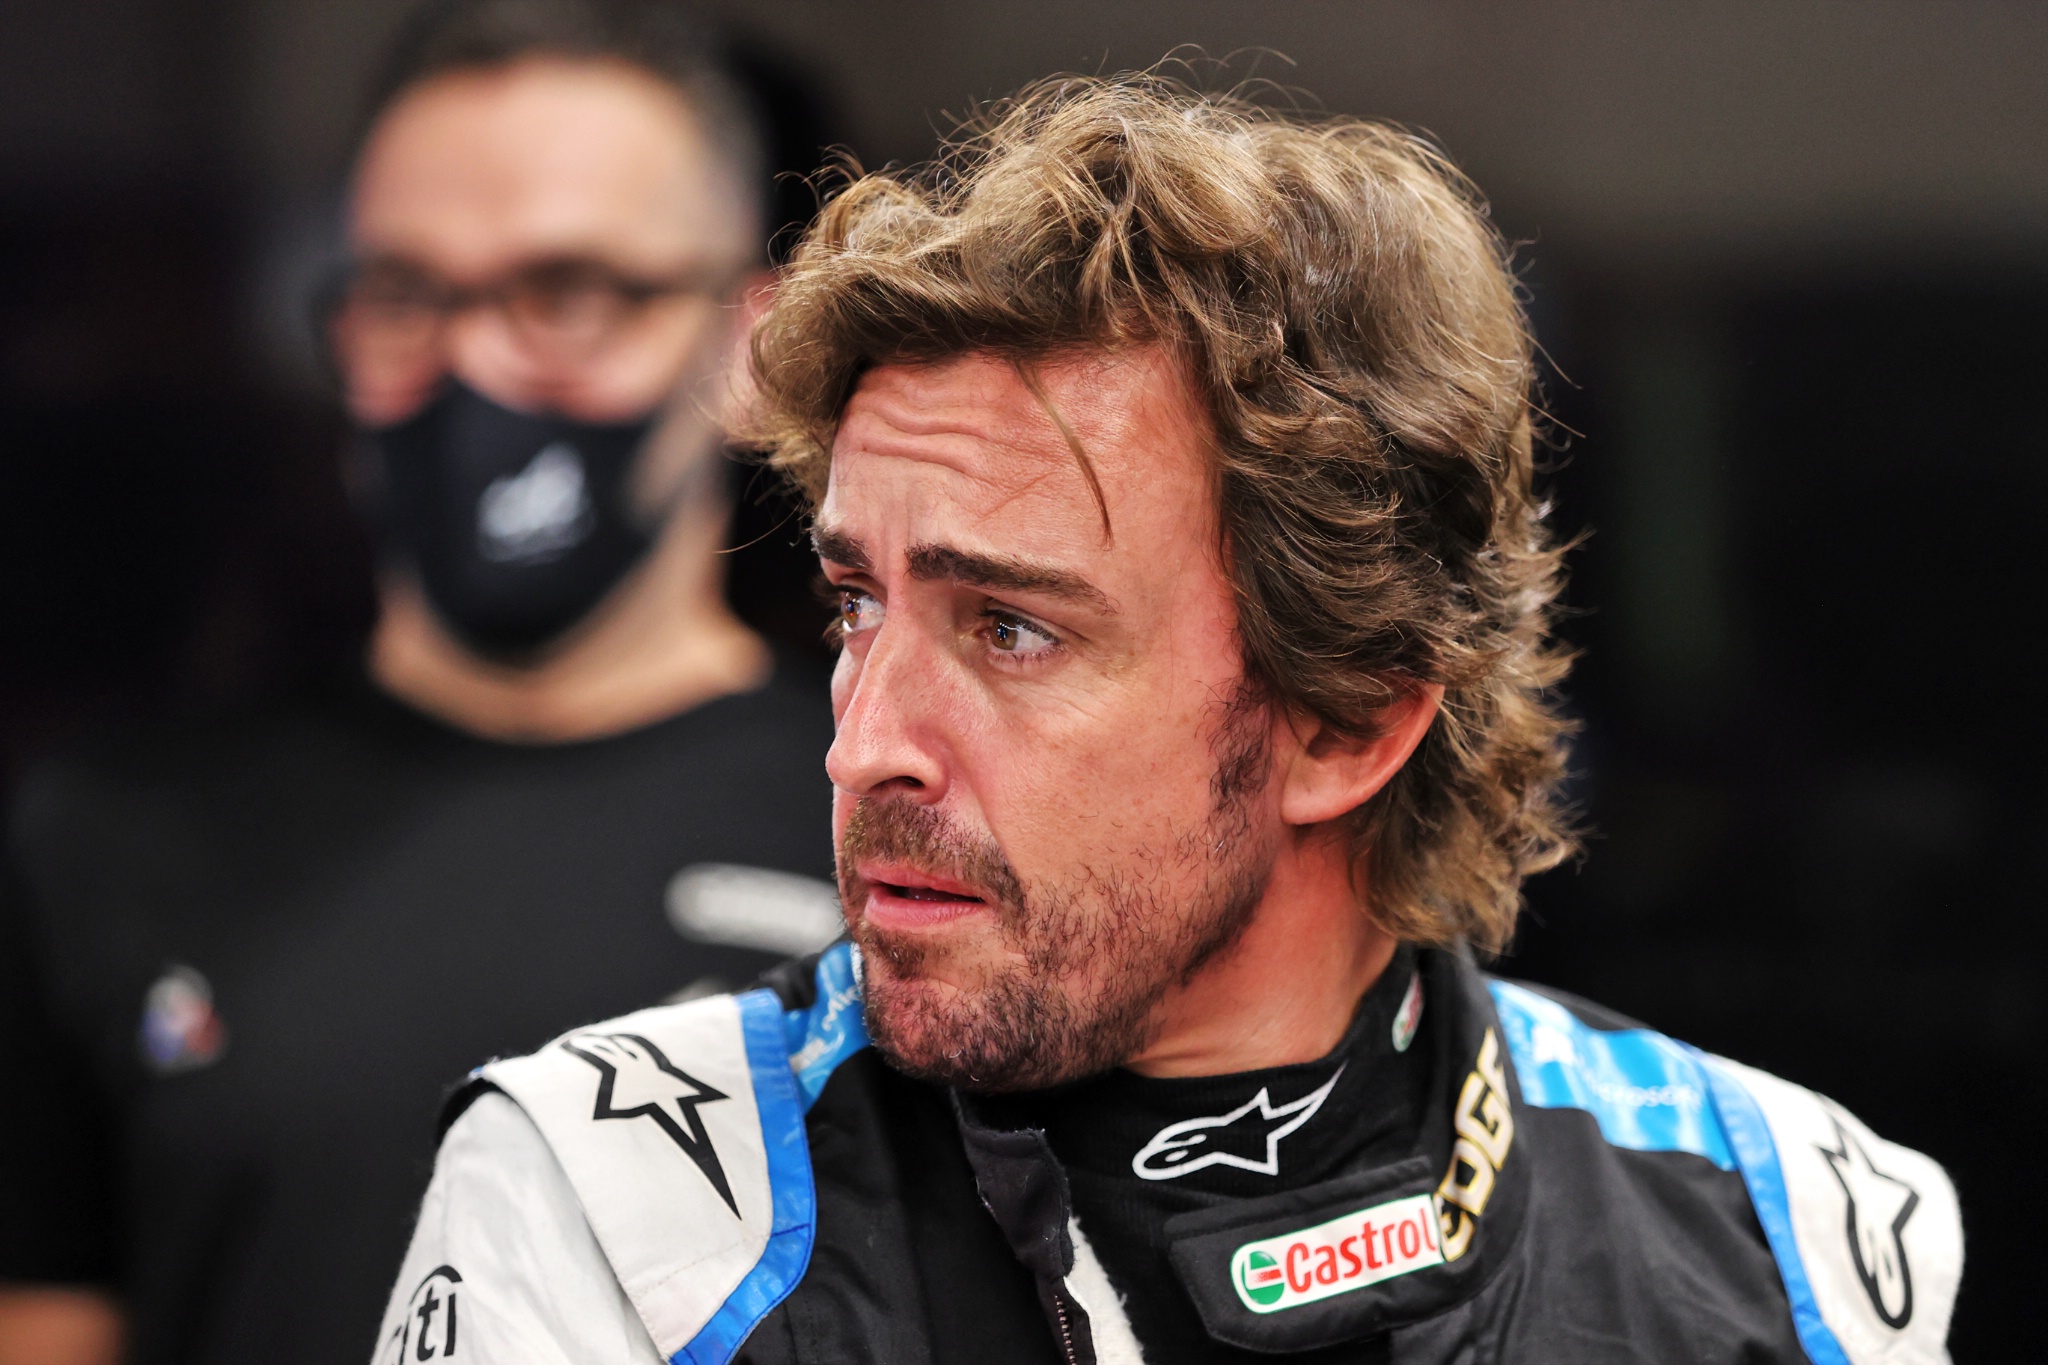 Aston Martin does not anticipate a decline in Alonso’s performance as he ages